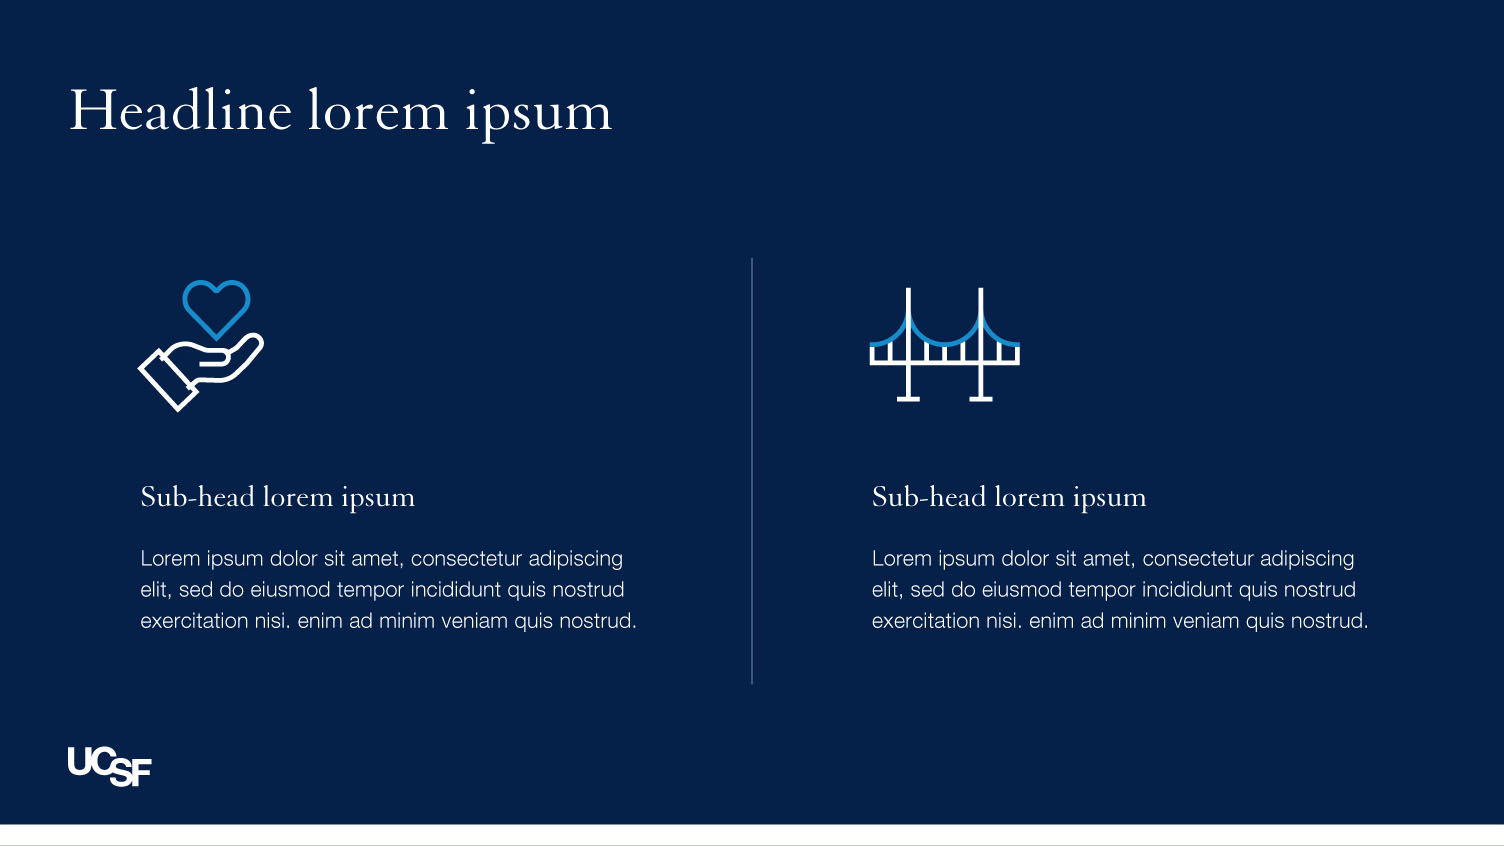 Sample website using iconography with location symbols in navy, blue and white on a dark background